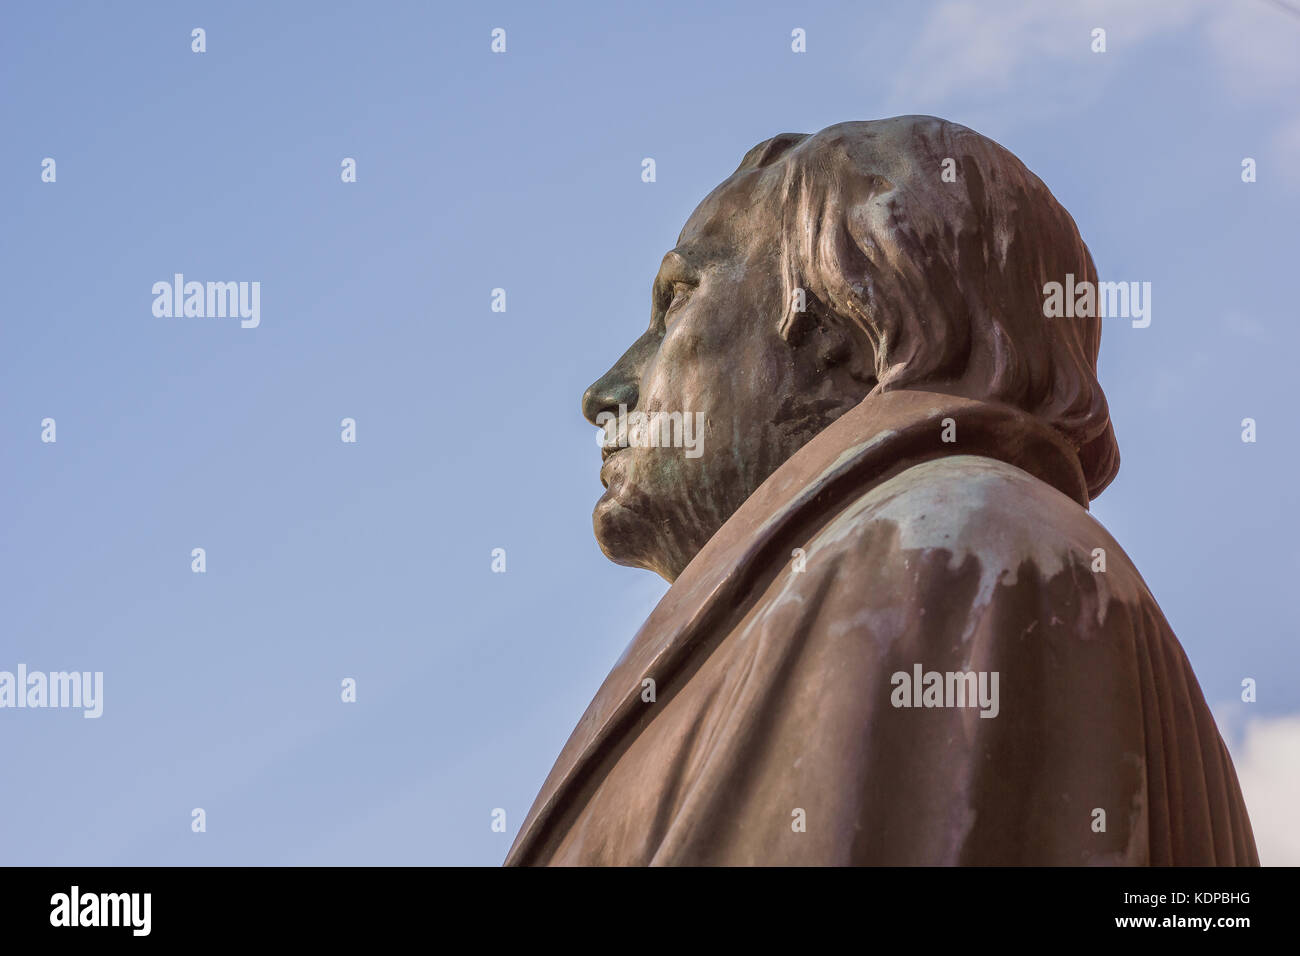 bronze statue of the reformer Martin Luther against blue sky. Profile from the left side. Copenhagen, July 6, 2016 Stock Photo